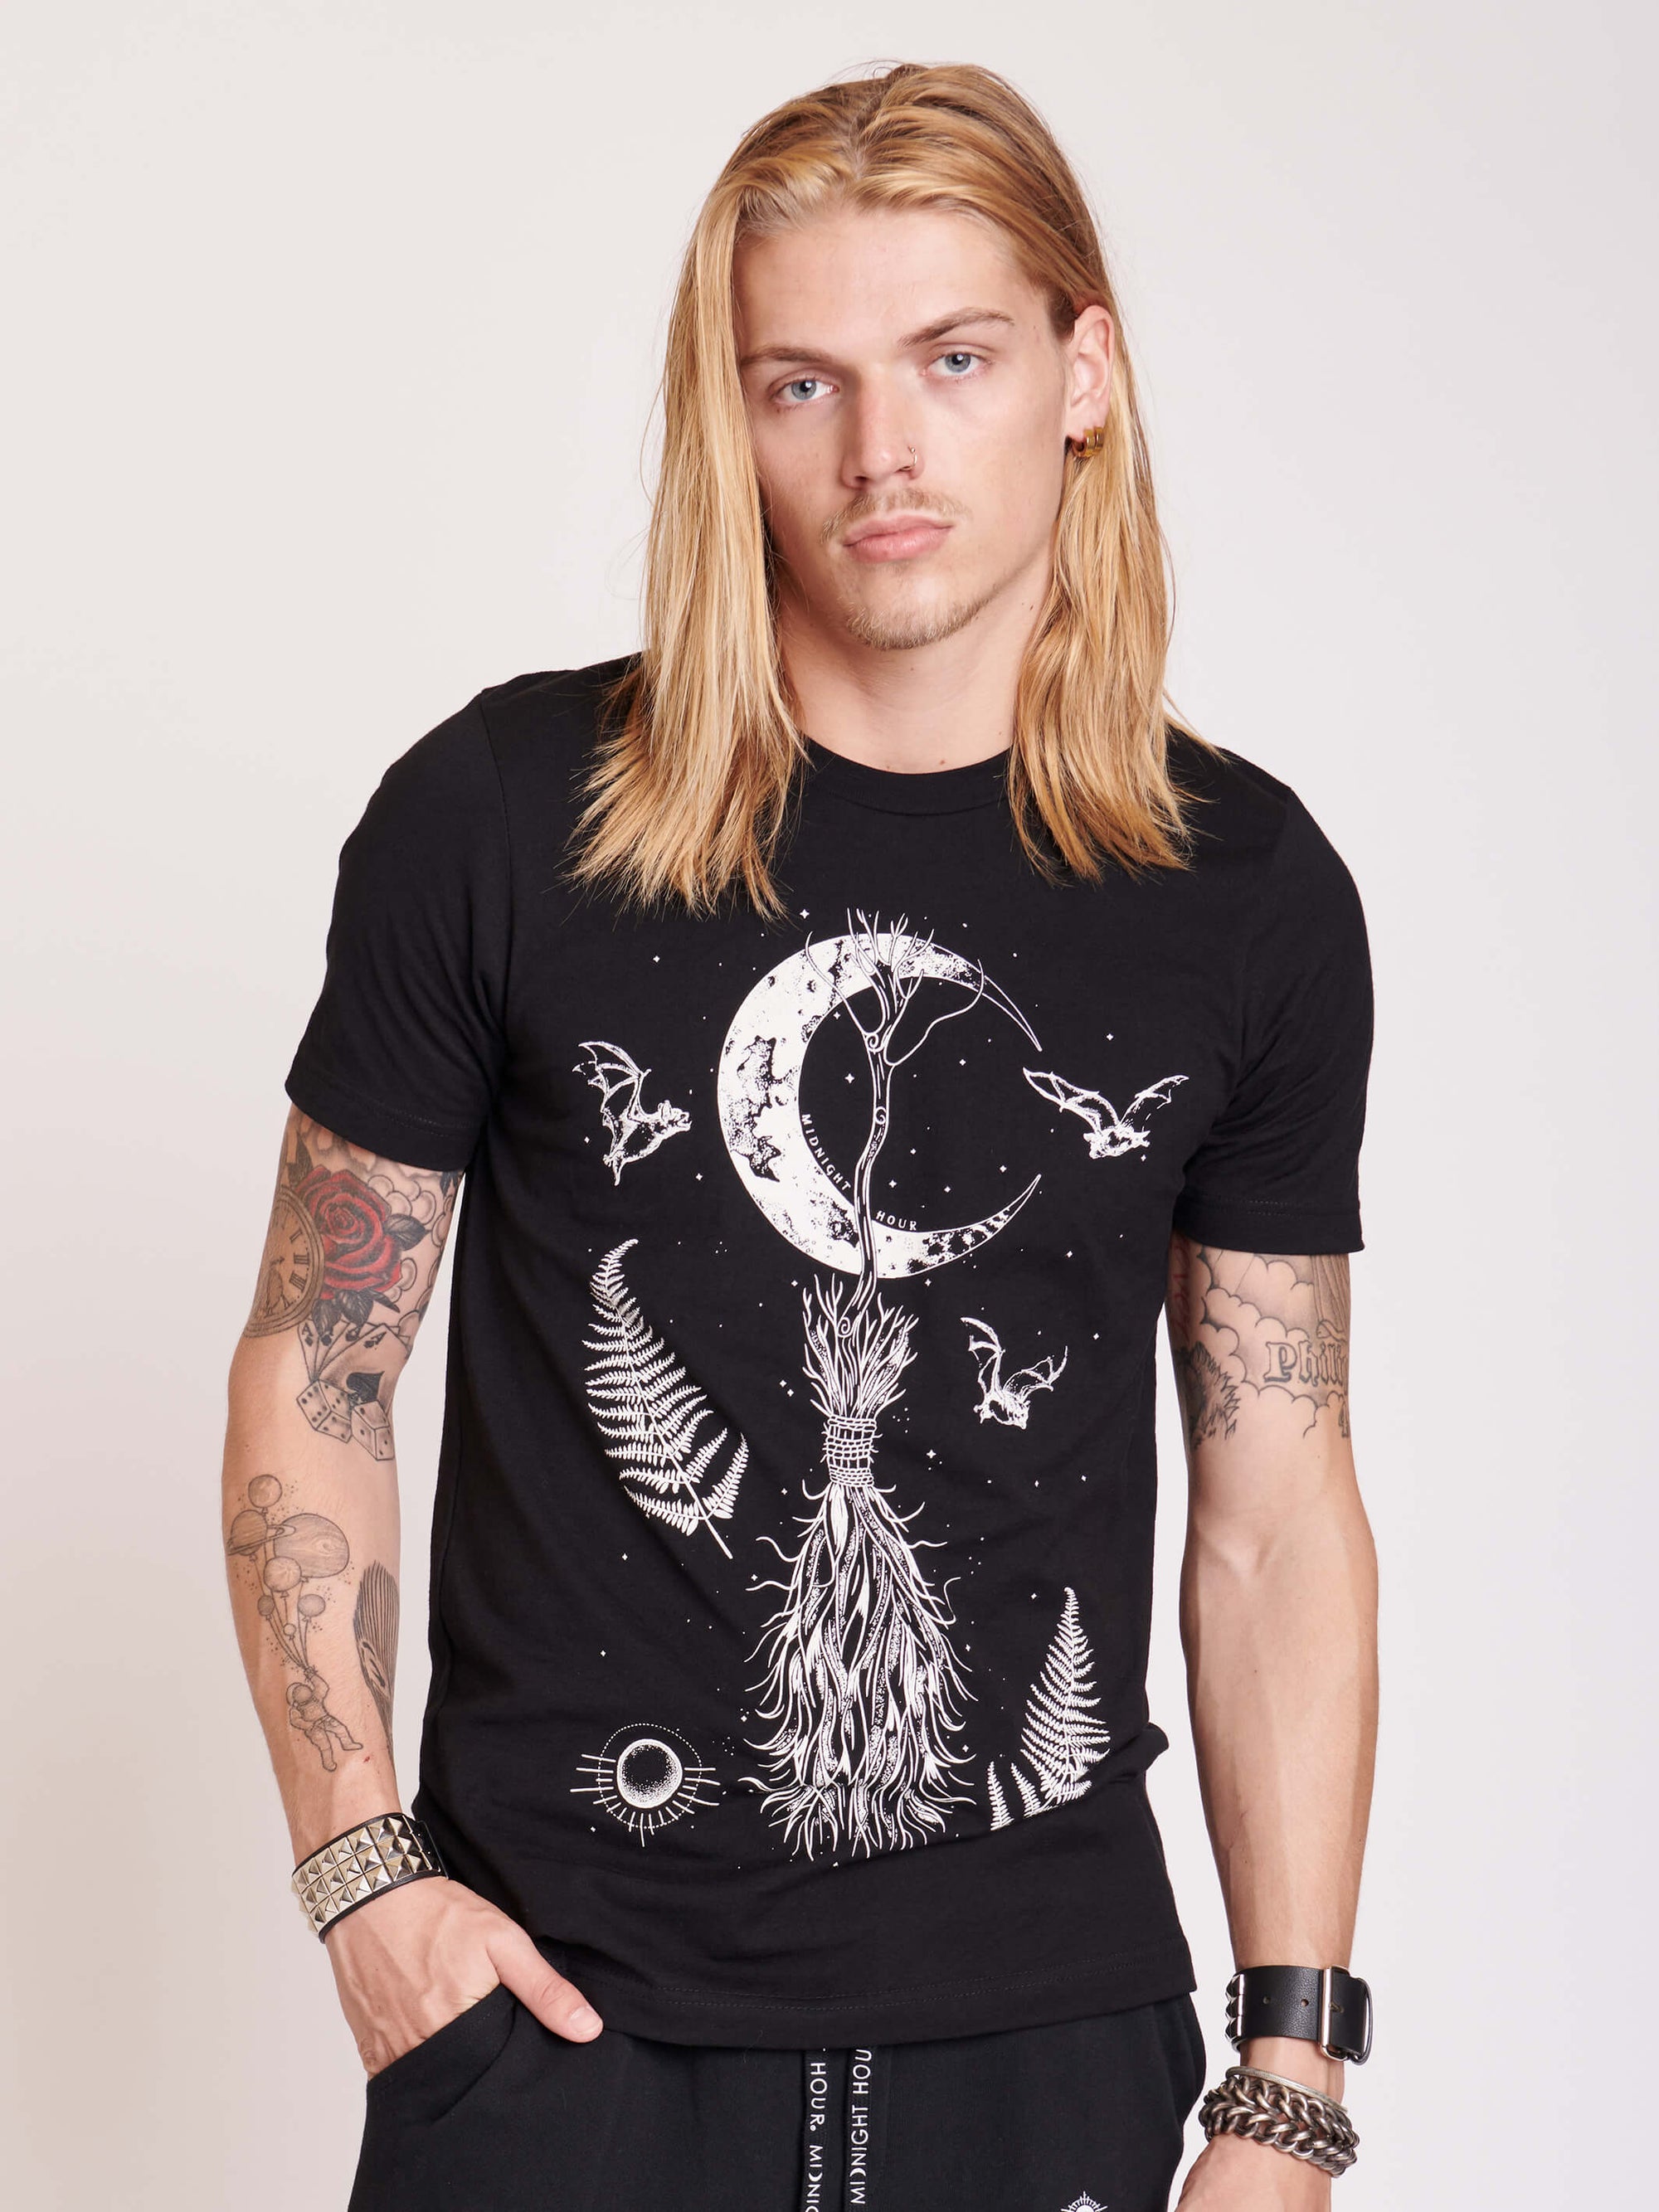 Witchy gothic bat t-shirt. Moon phases, crystals, goth. Black t-shirt with gothic bat print, moon print, Witchy goth fashion. Goth grunge clothing